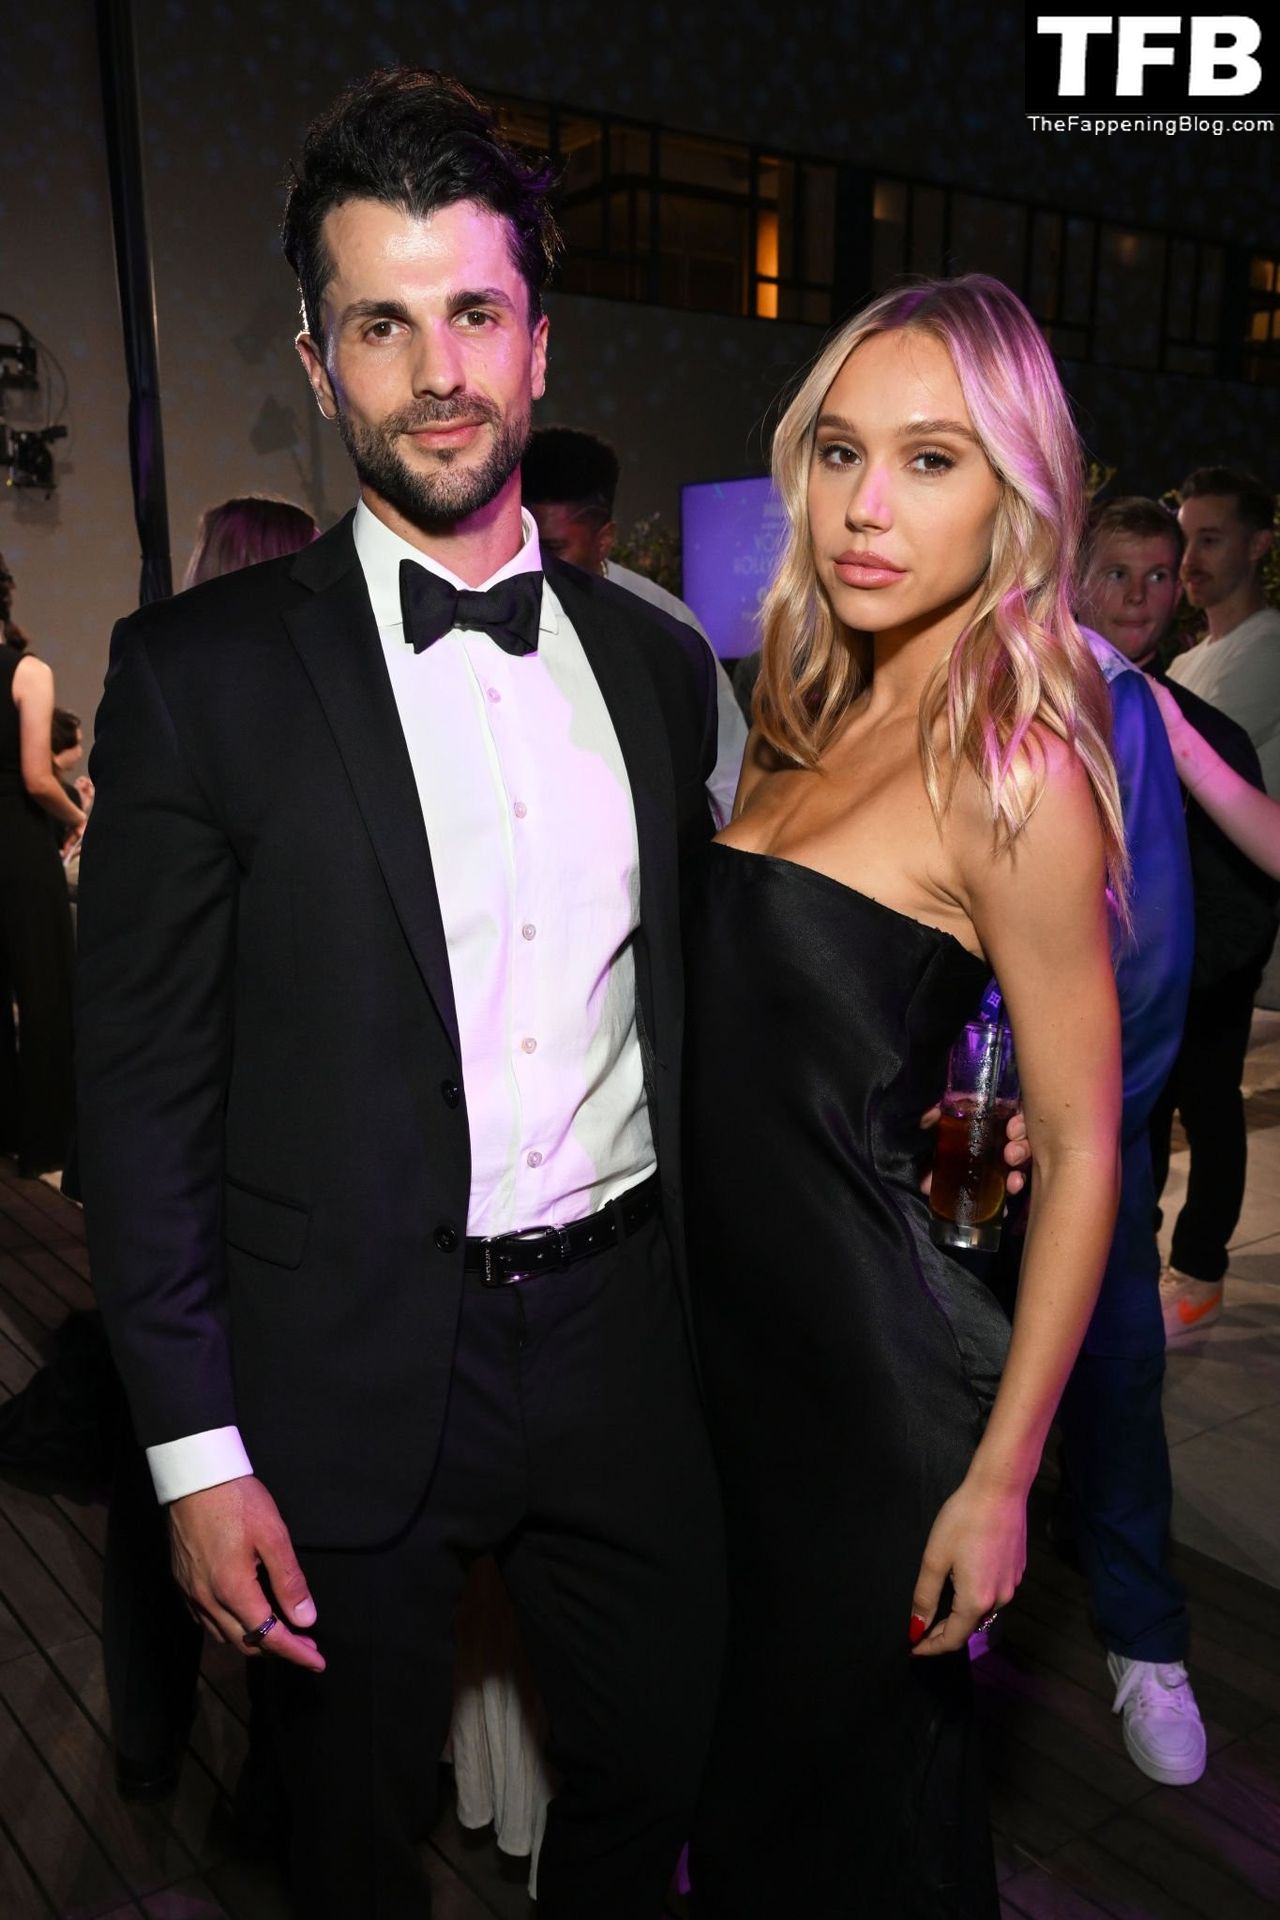 Alexis Ren Looks Stunning in a Black Dress at the Variety’s 2022 Power Of Young Hollywood Celebration (37 Photos)